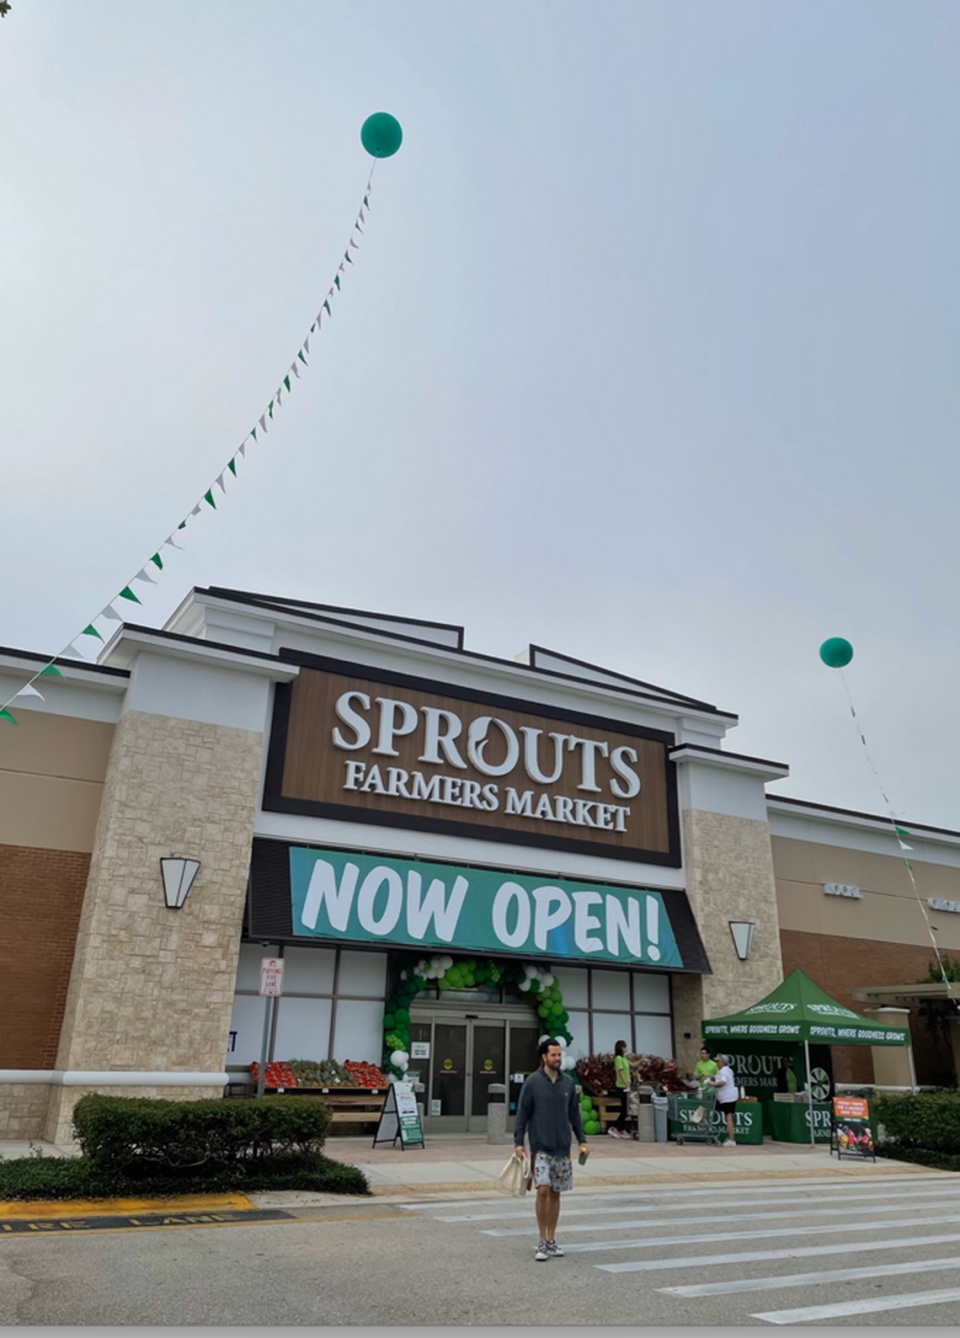 Sprouts opens its stores with customer lures like free gift certificates, food tastings and other activities. The coming new location in the Coconut Grove area of Miami at 2750 SW 27th Terrace that opens on Friday, Jan. 19, 2024, follows suit.